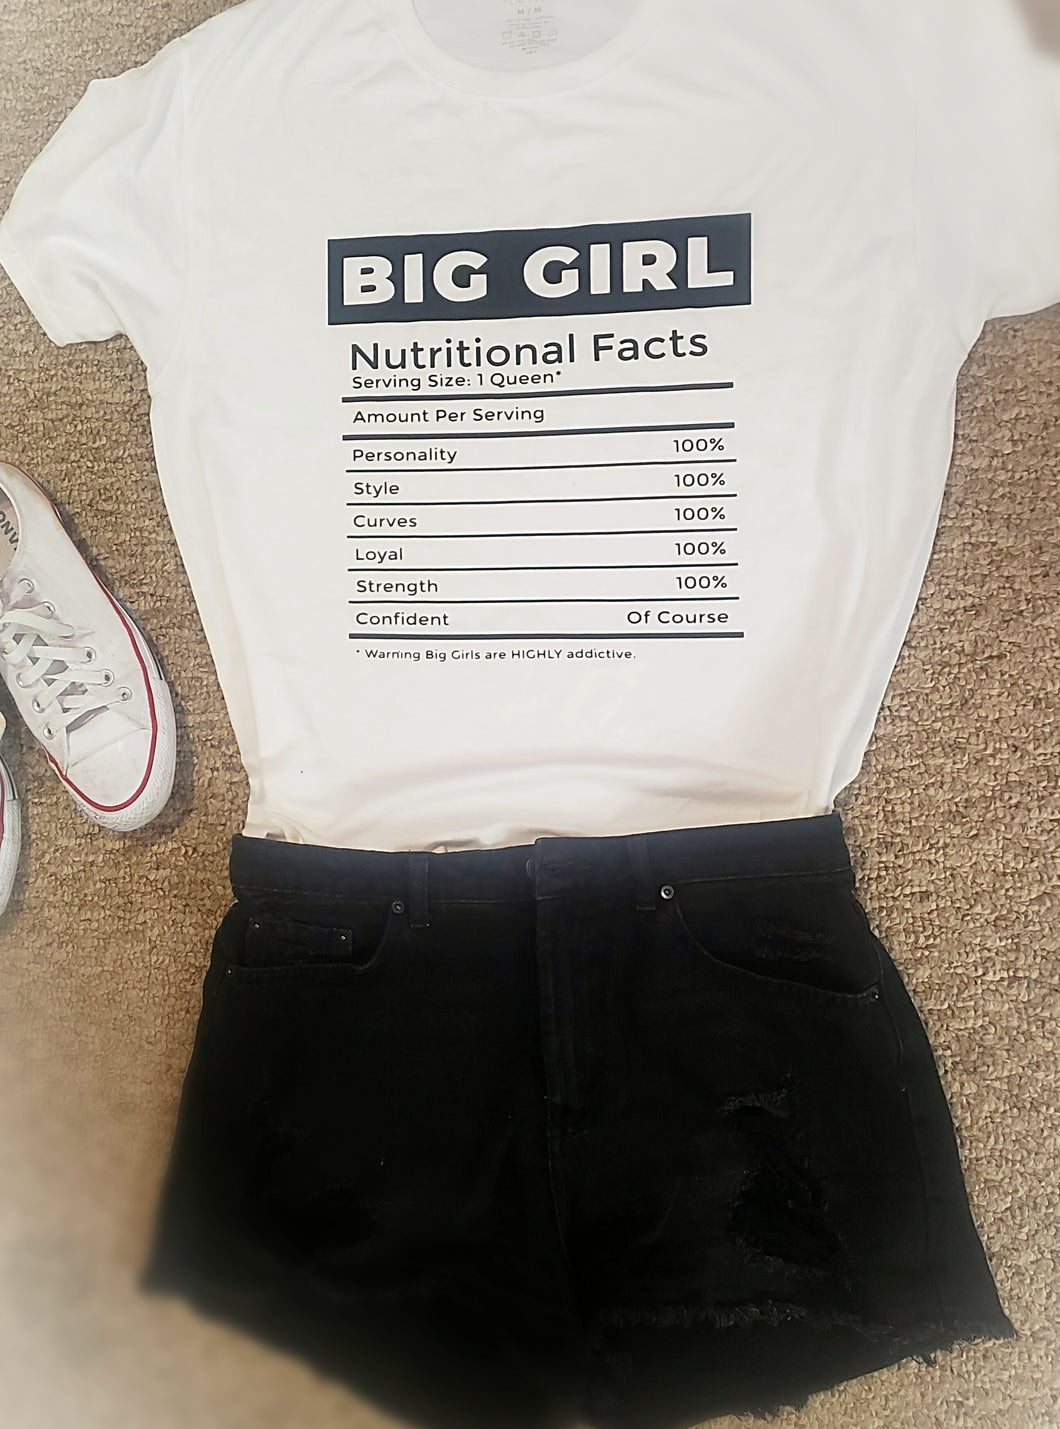 Big Girl Nutritional Facts